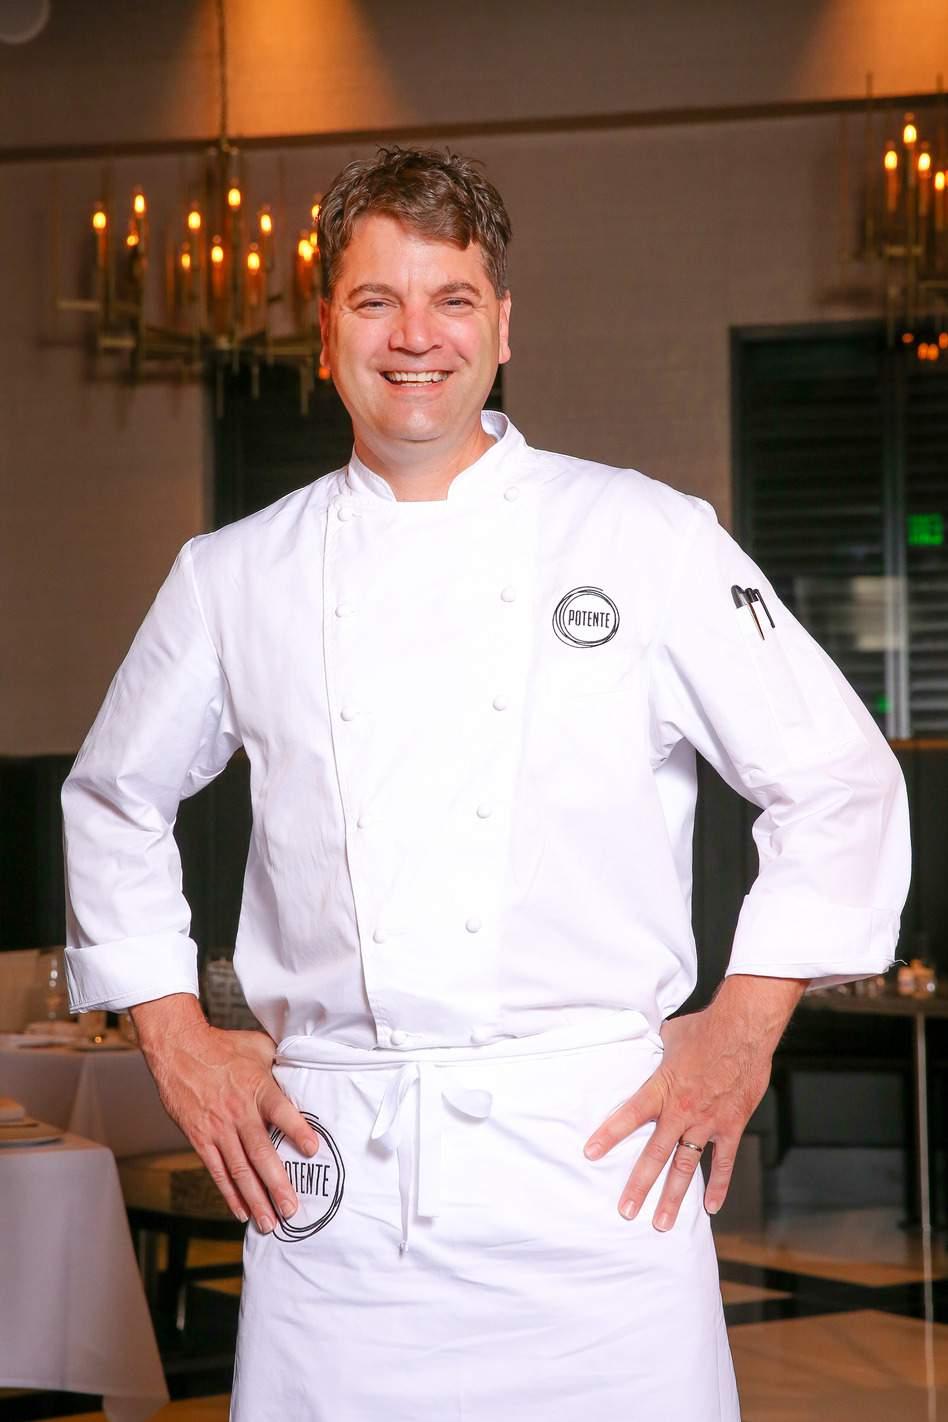 MEET OUR CHEF, Danny Trace. Executive Chef Trace received his formal education at the culinary arts program at Johnson & Wales University in Rhode Island.